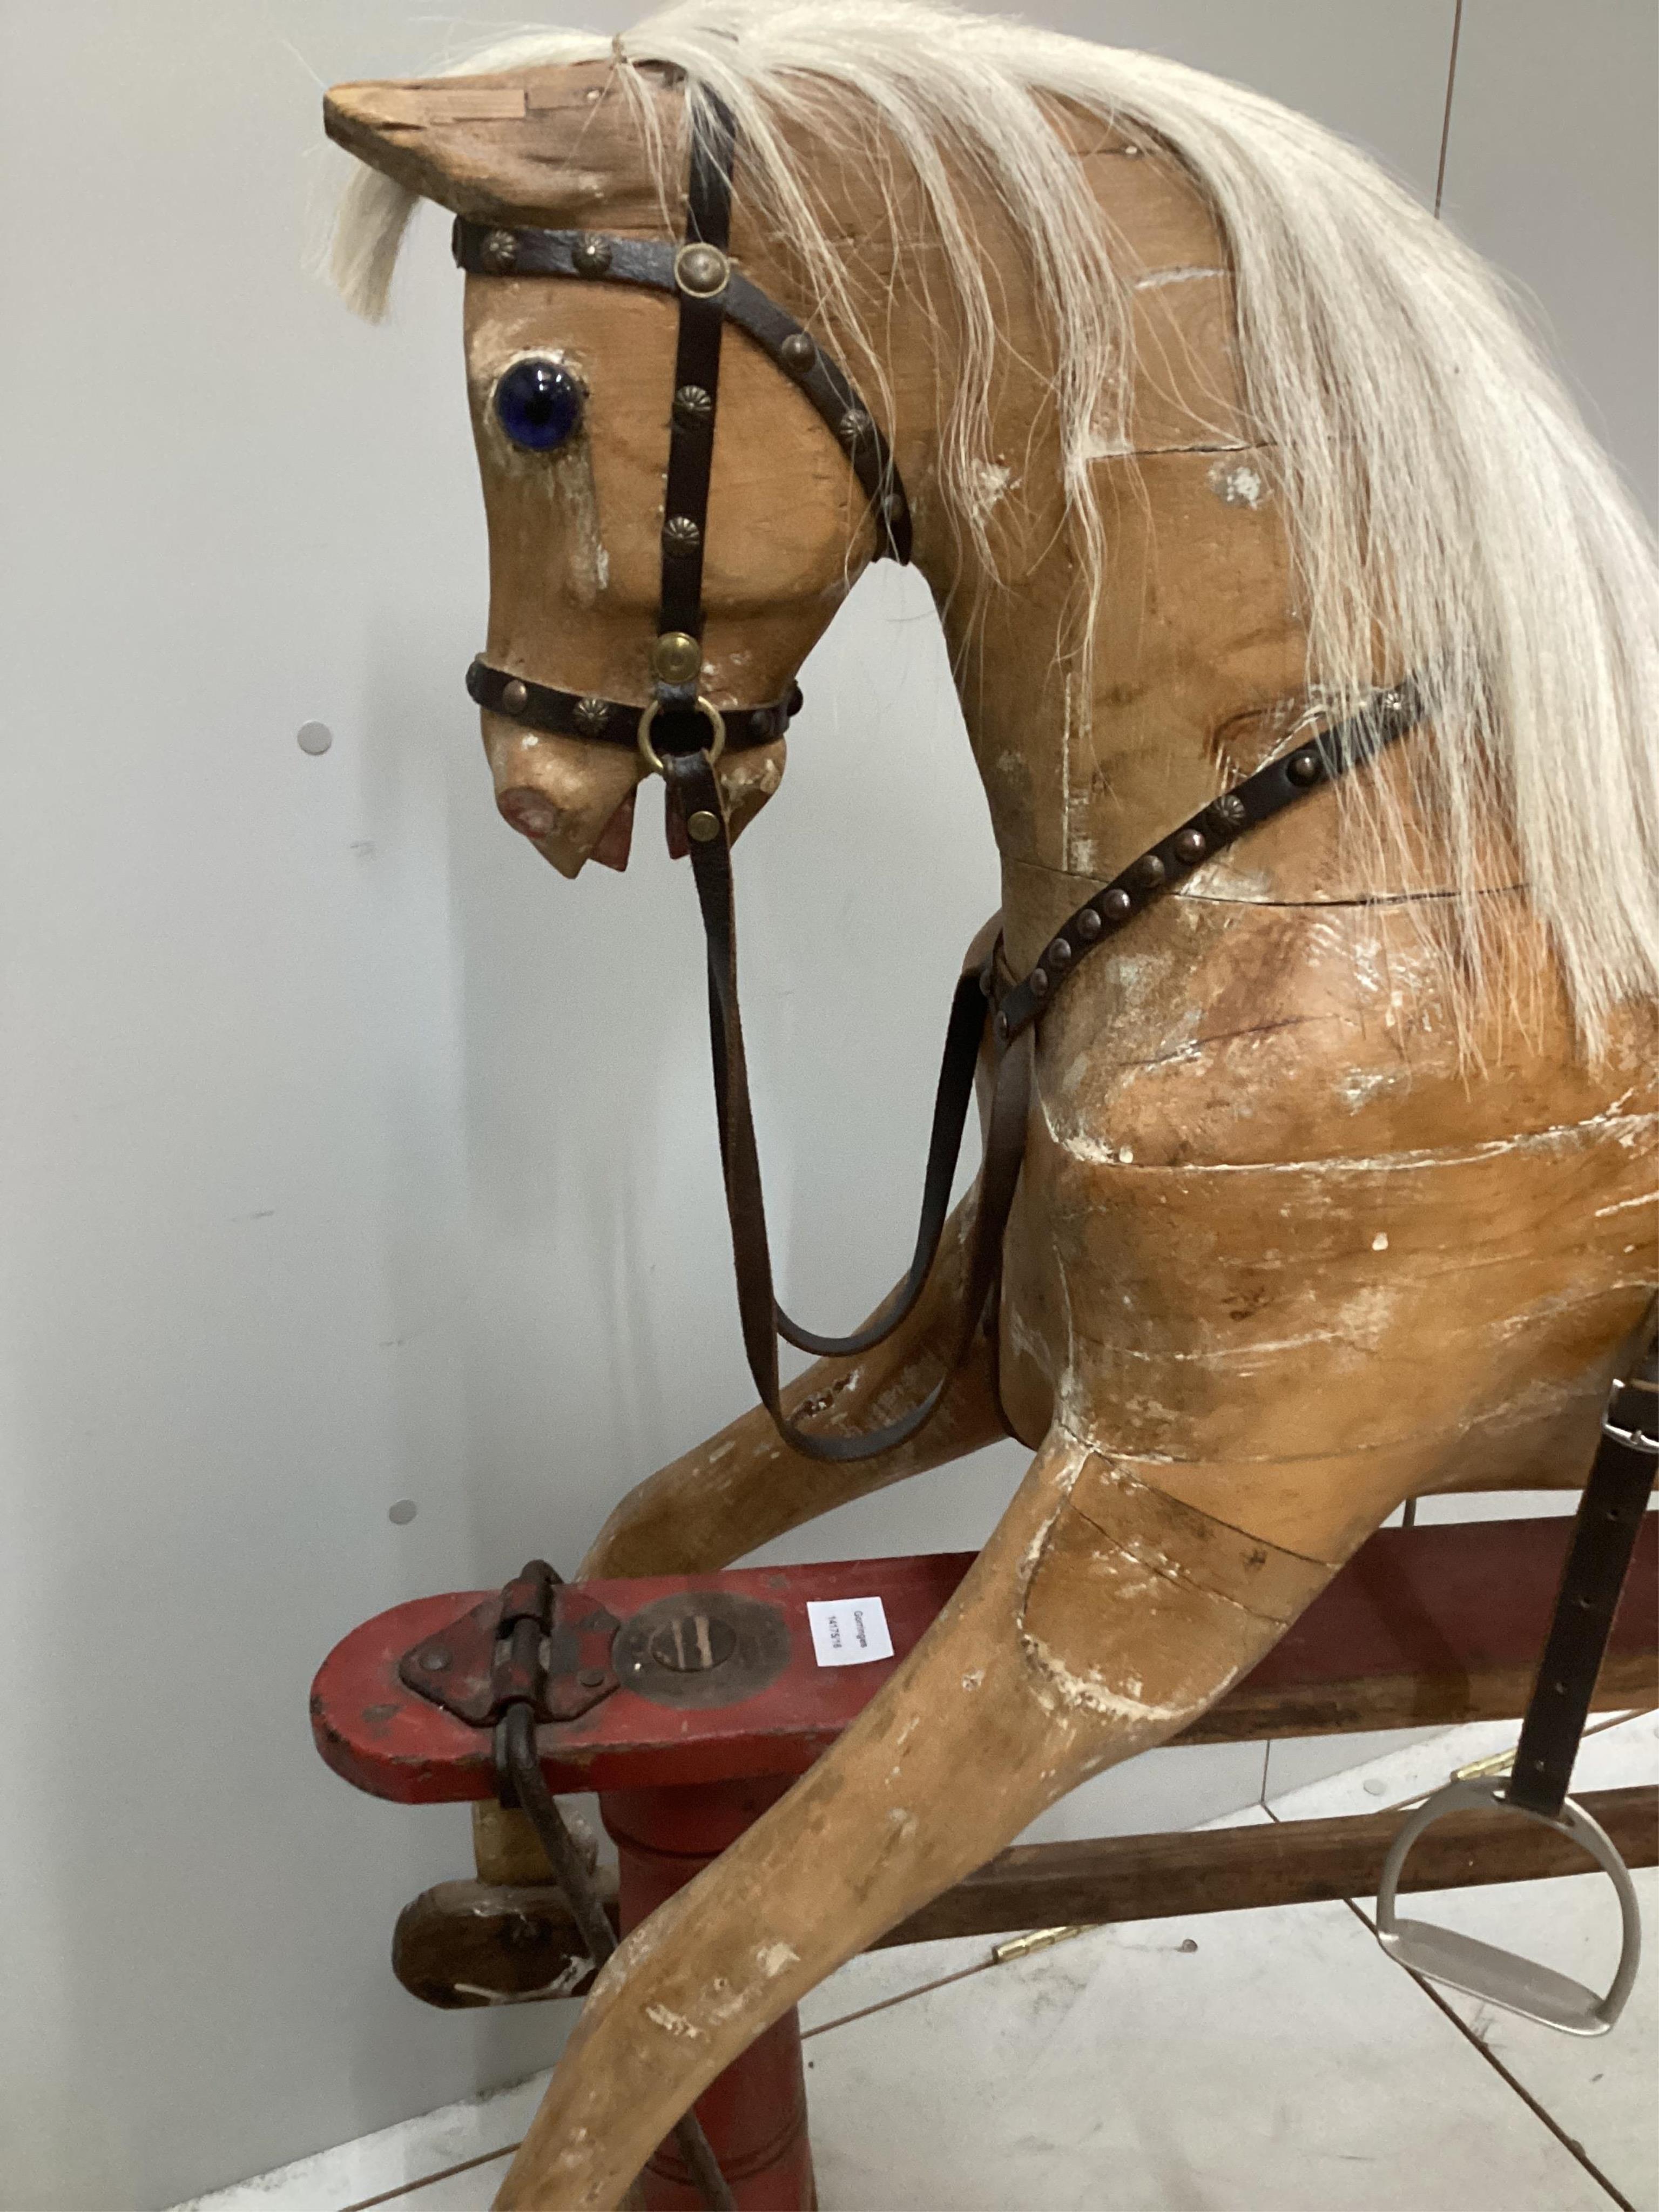 An early 20th century carved wood rocking horse on stand (a.f.), 117cm high, base of stand 146 wide